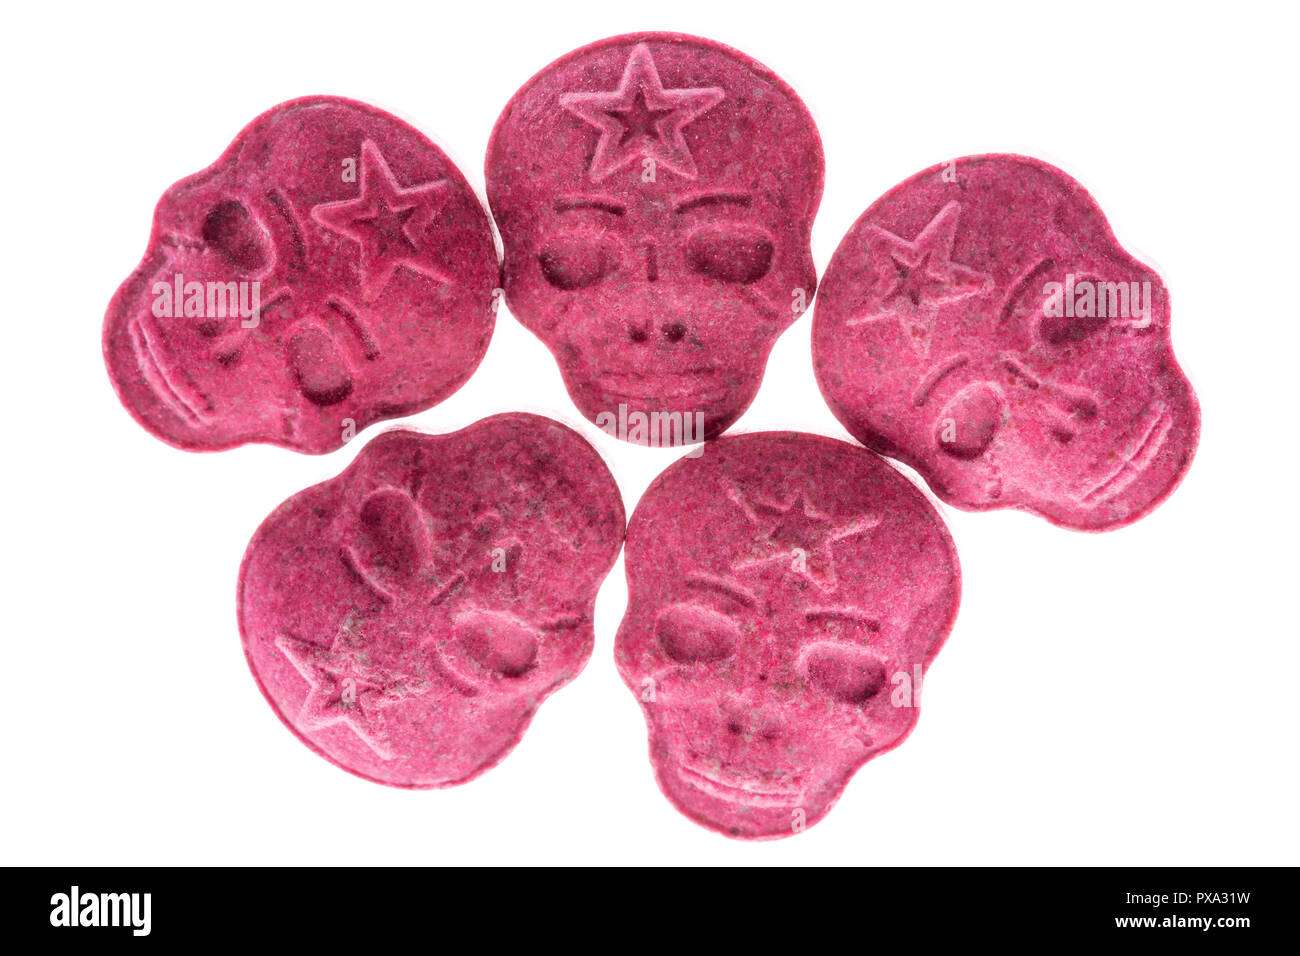 Five Red Army Skull, Ecstasy, MDMA or medication pills shaped like a skull isolated on a white background. Stock Photo